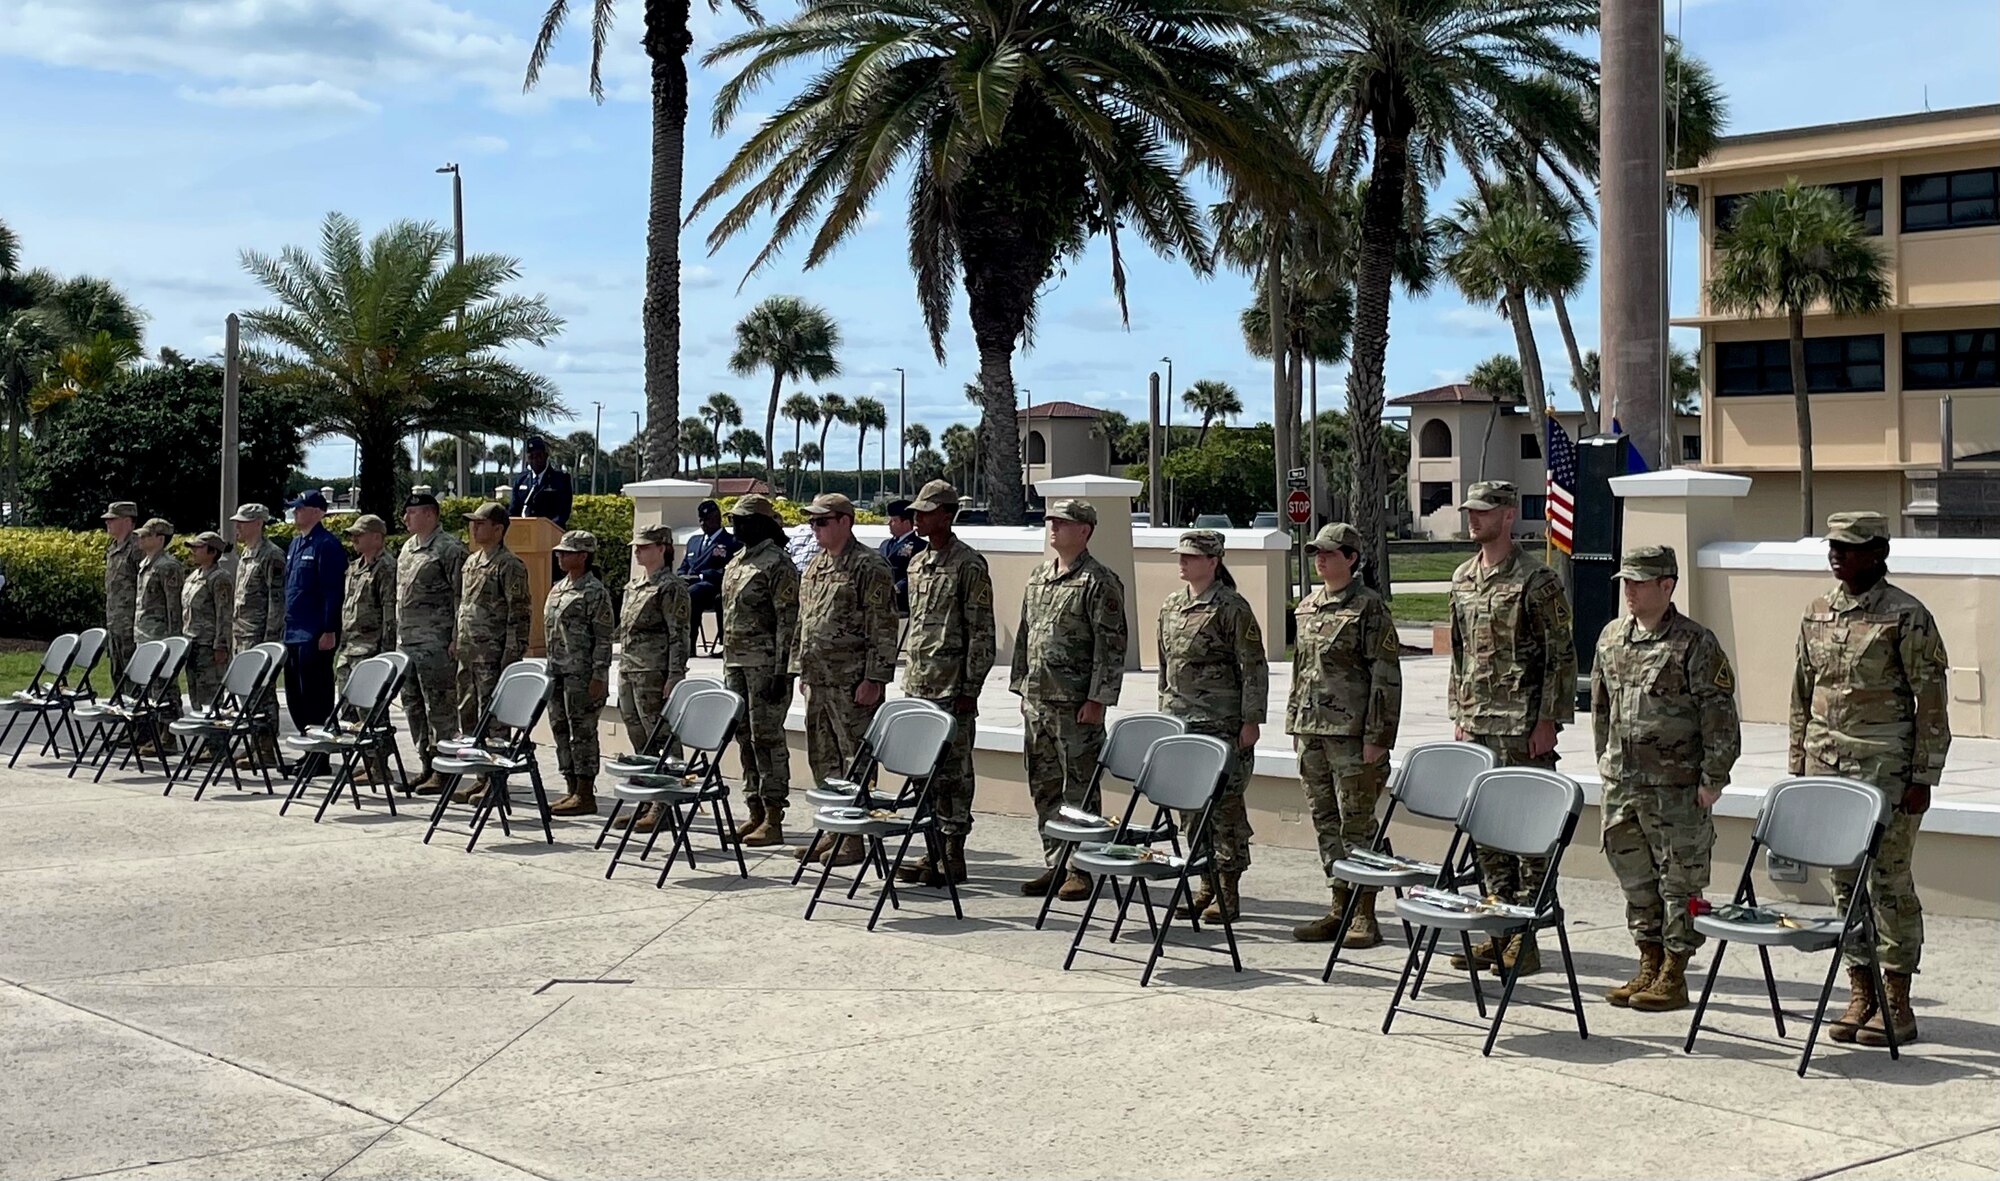 Airmen stand next to 19 chairs with 19 roses and 19 folded flags representing the 19 fallen Airmen during the 26th anniversary Khobar Tower memorial ceremony, June 21, 2021, on Patrick Space Force Base, Florida. On the night of June 25, 1996, a bomb was detonated near the Khobar Tower housing complex in Dhahran, Saudi Arabia, killing 19 Airmen and injuring more than 400 U.S. and international military members and civilians. (U.S. Air Force photo by Staff Sgt. Darius Sostre-Miroir)